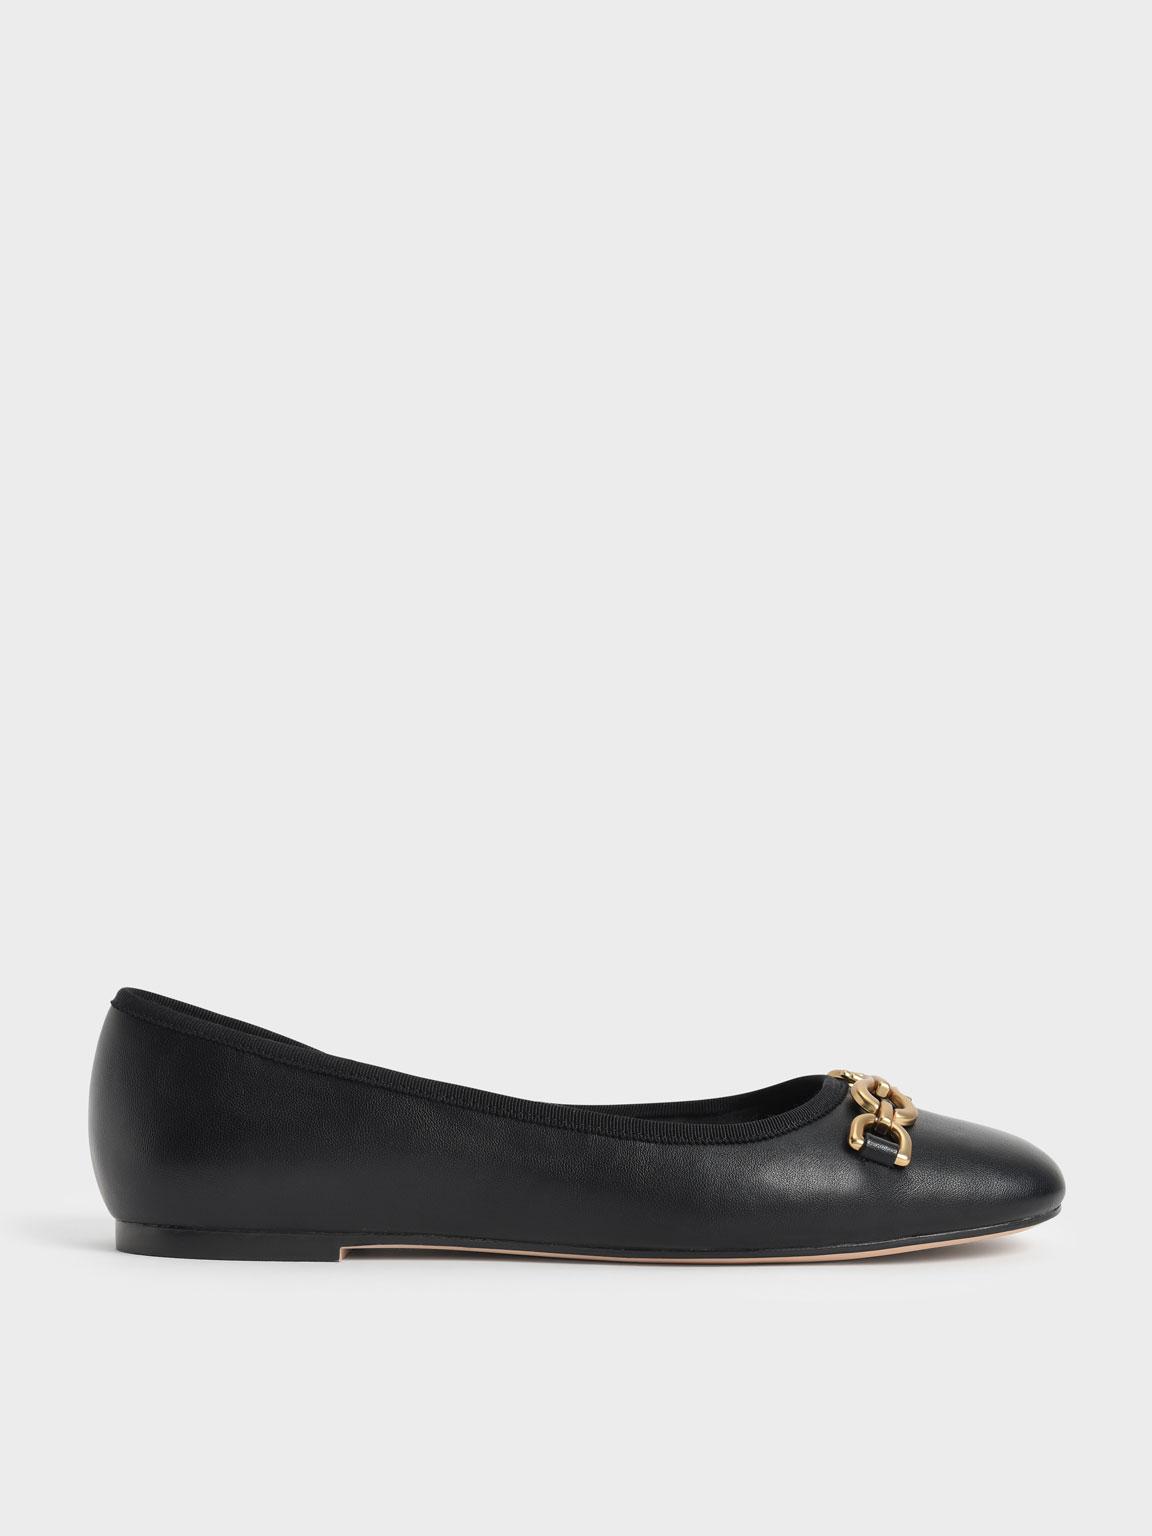 Charles & Keith Chain Link Ballerina Flats in Black | Lyst